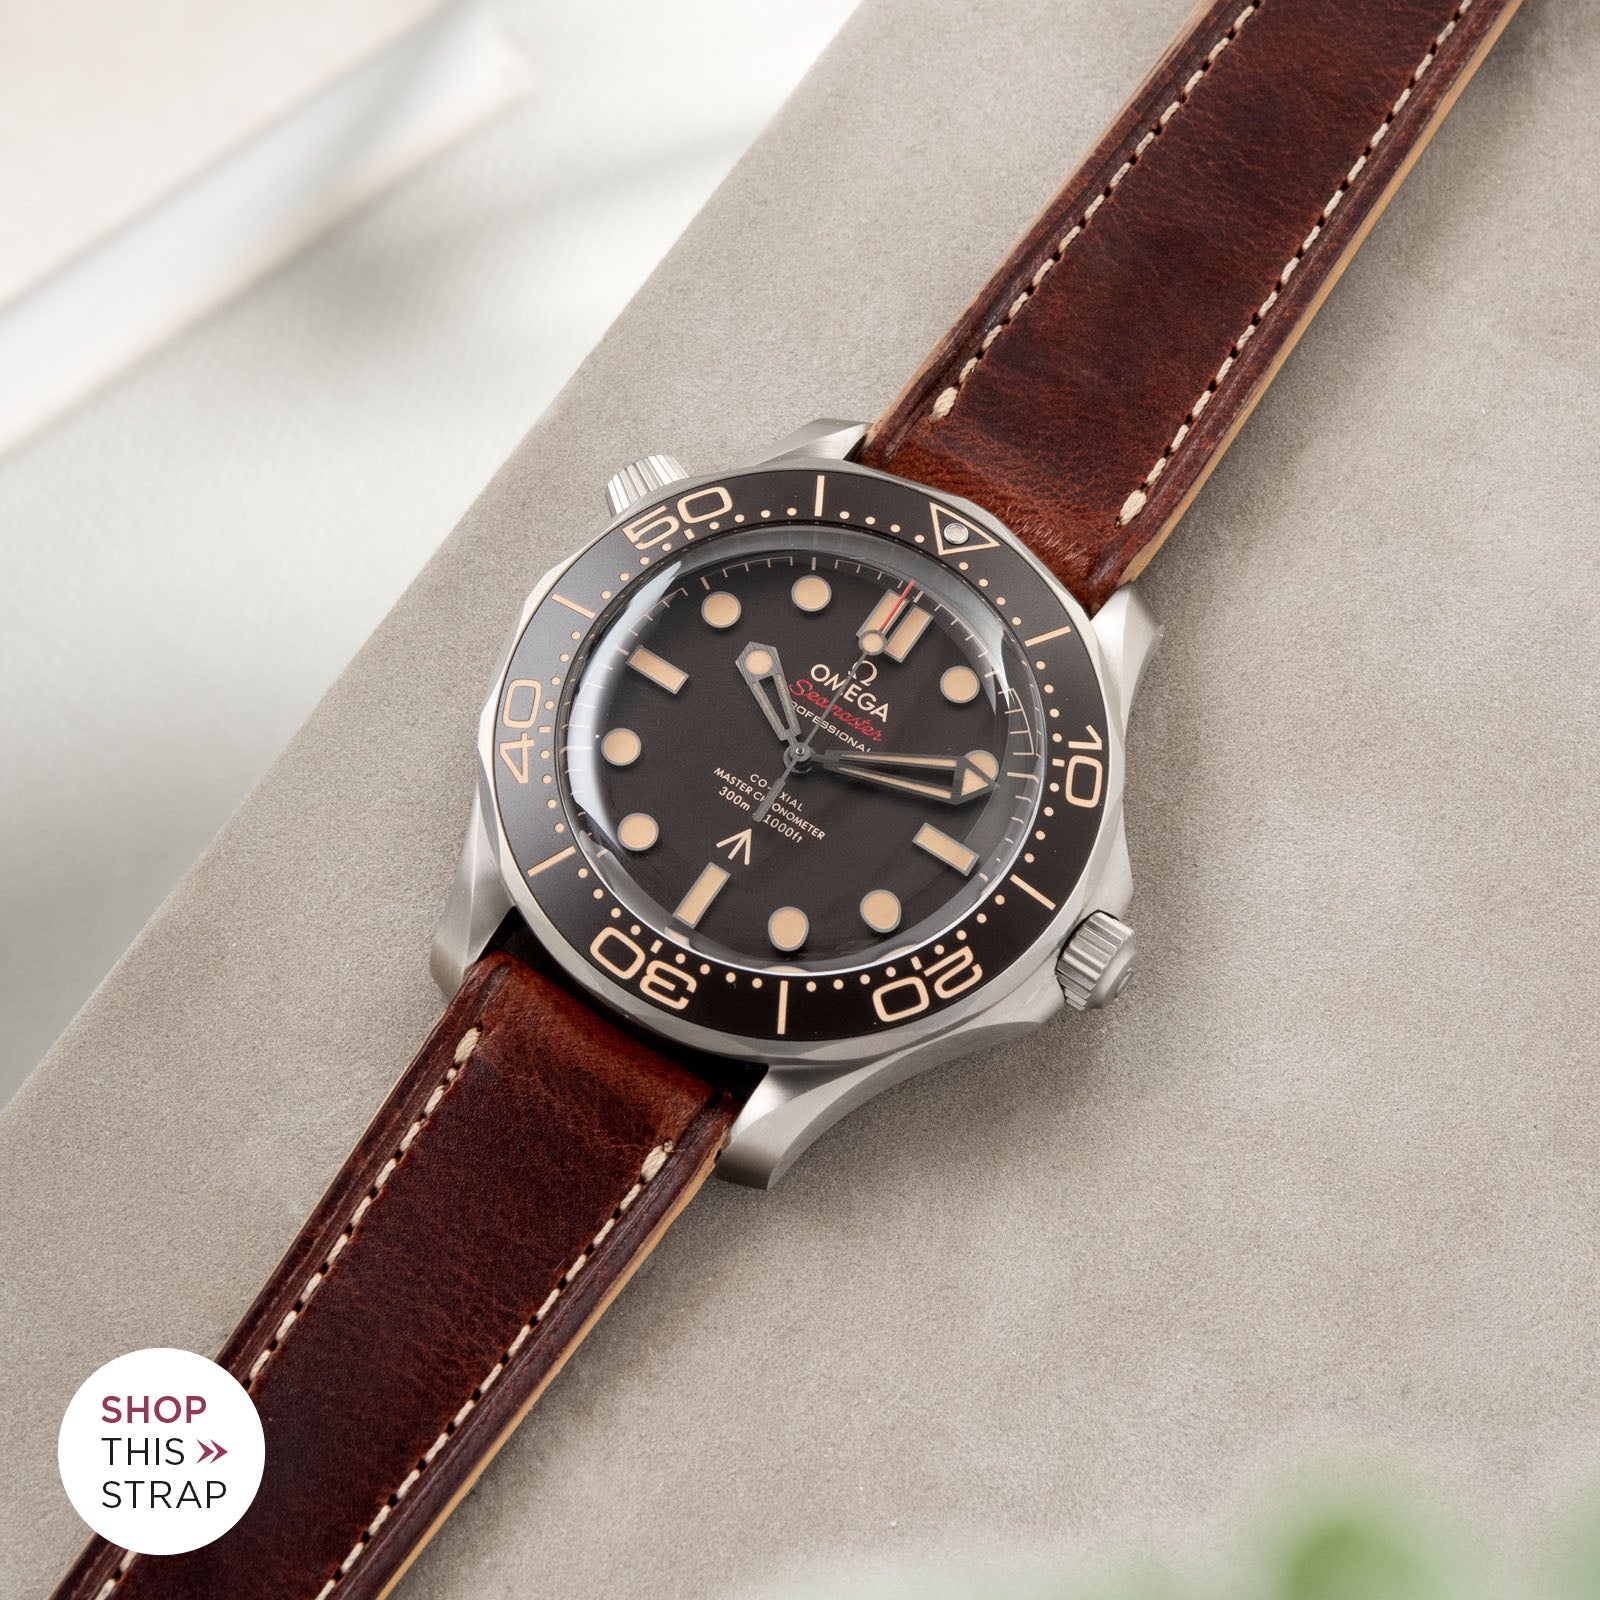 Bulang and Sons_Strap Guide_The Omega Seamaster James Bond_Siena Brown Retro Leather Watch Strap